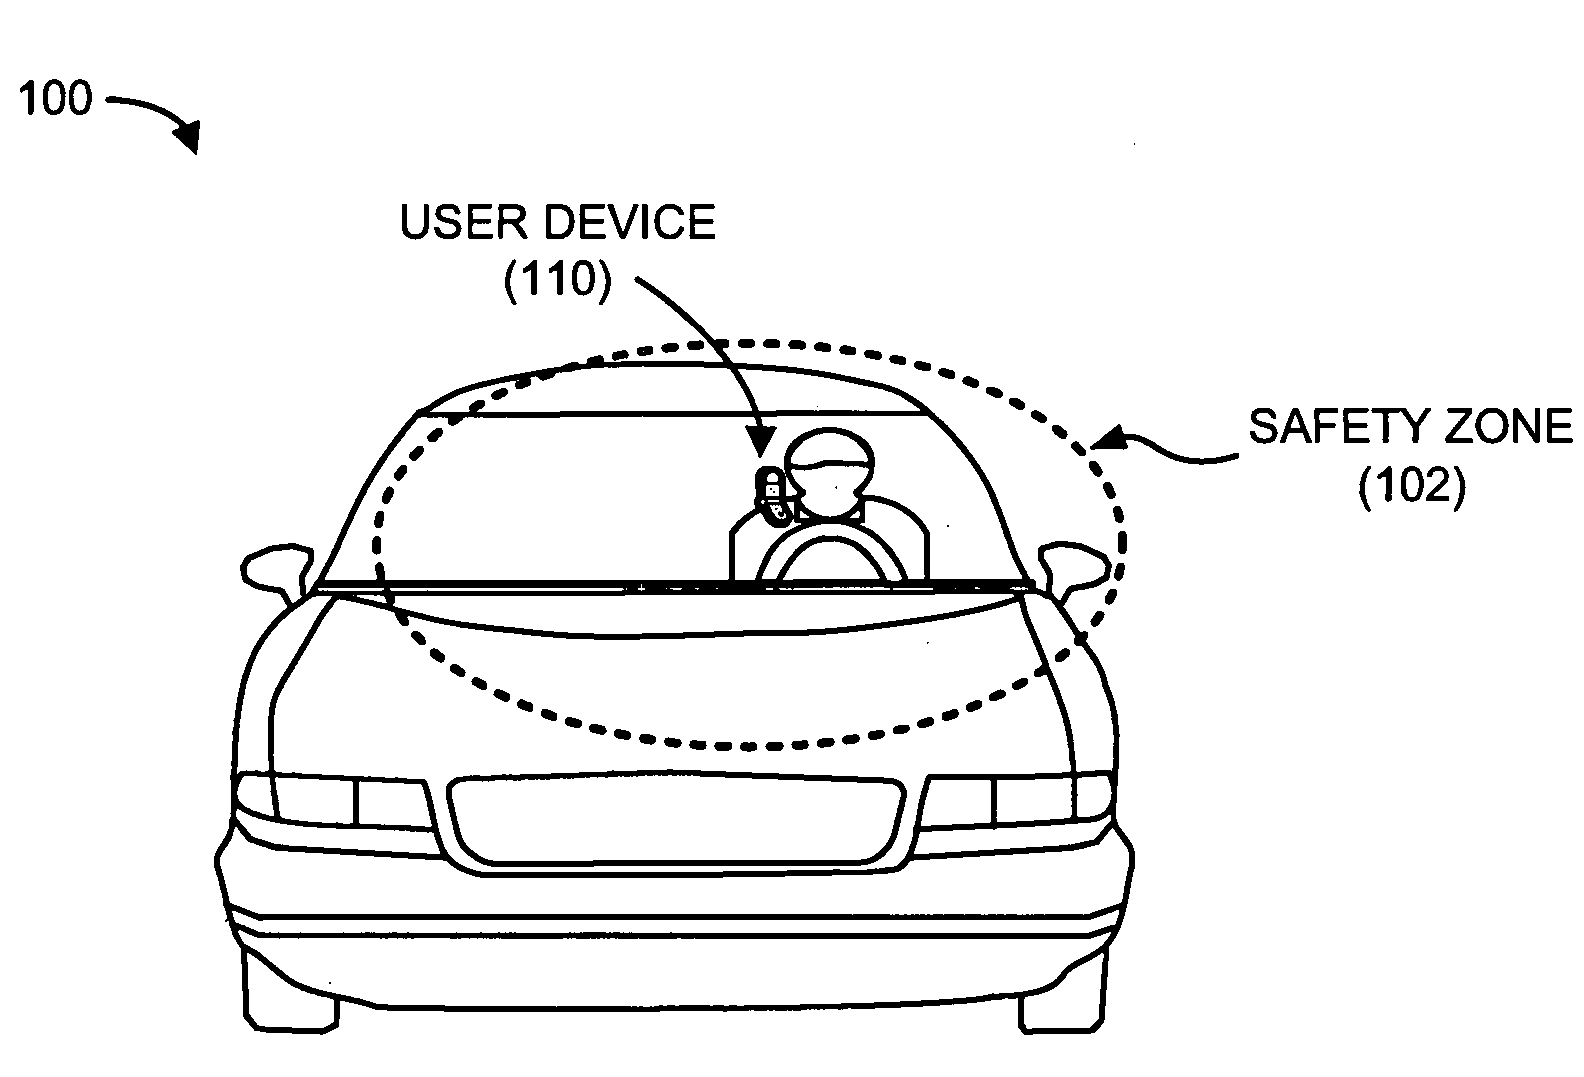 Vehicle computer link to mobile phone